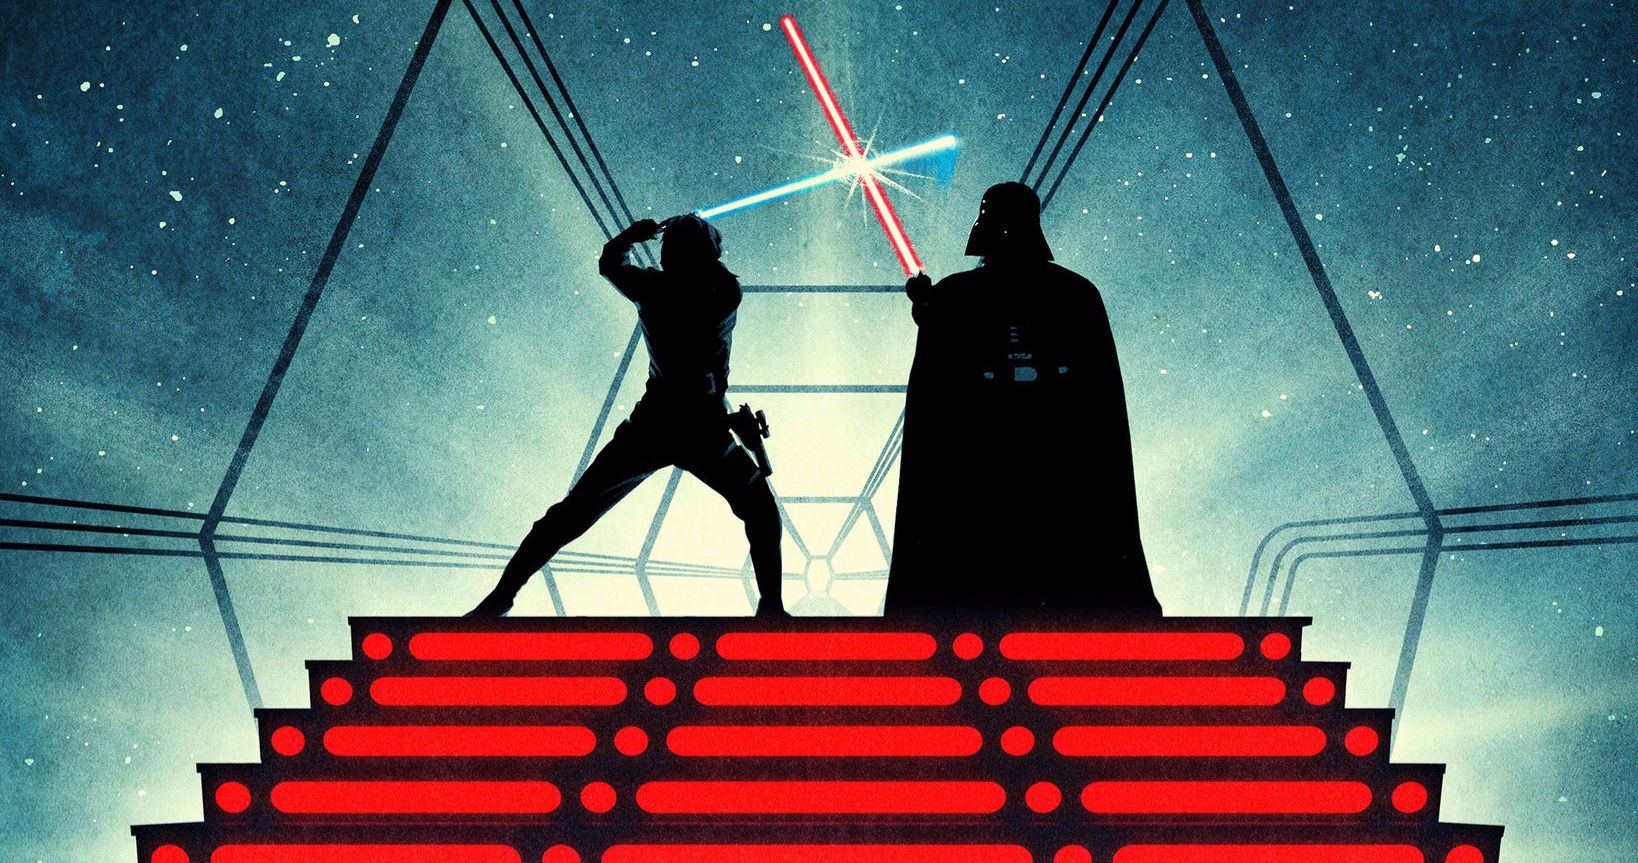 The Empire Strikes Back Returns to U.S. Theaters Next Week, Check Out the New Poster